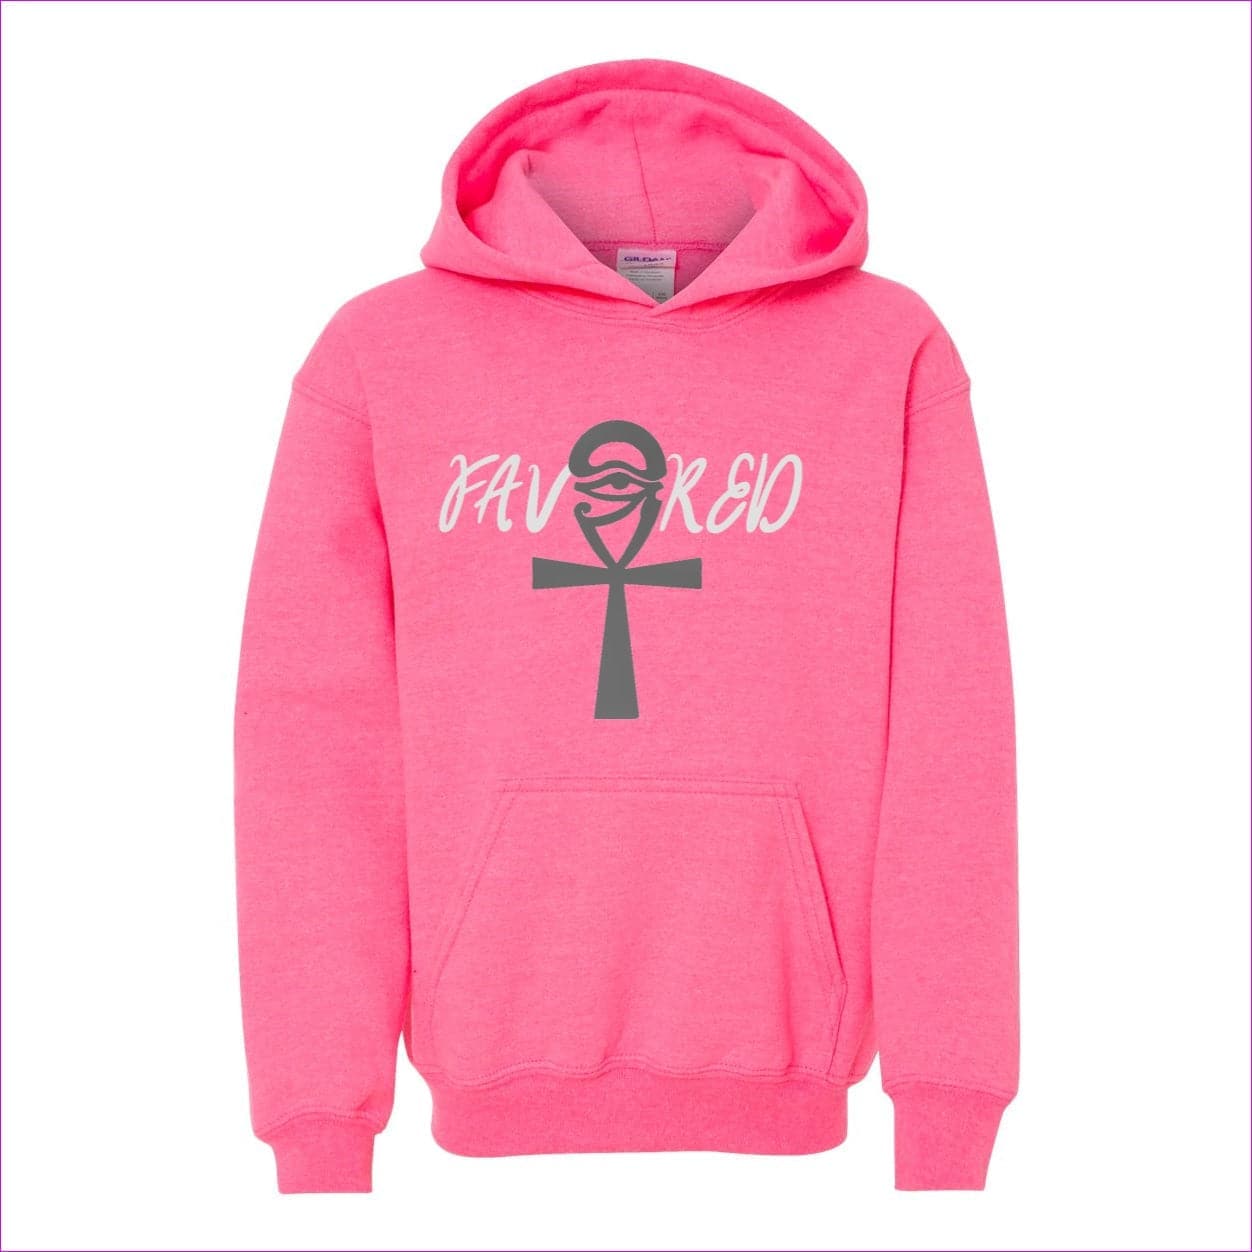 Safety Pink - Favored Heavy Blend Youth Hooded Sweatshirt - kids hoodie at TFC&H Co.